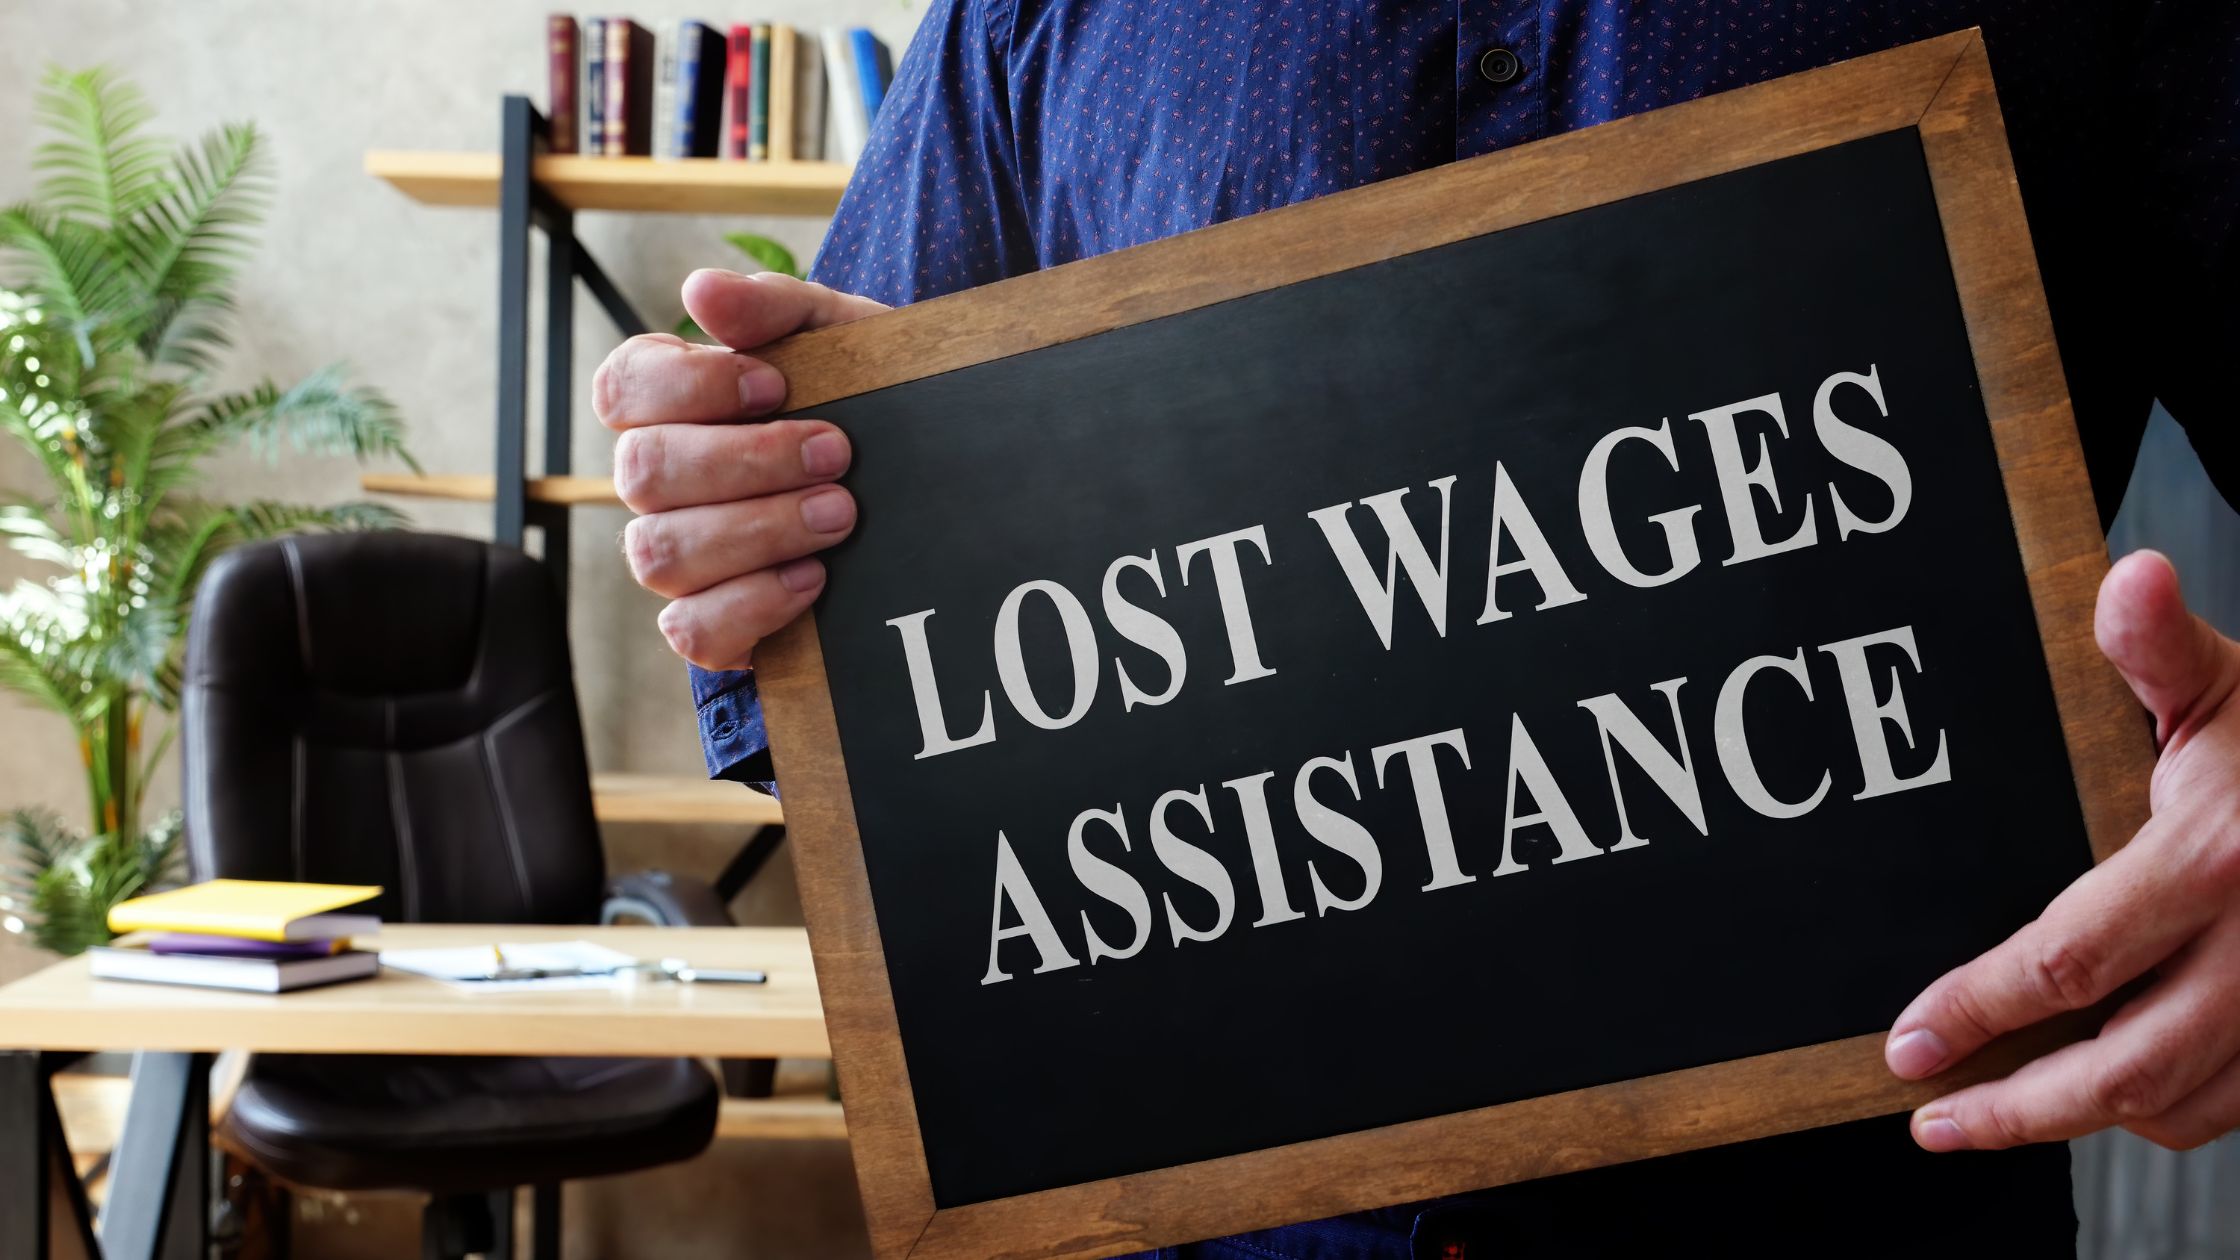 A person holds a chalkboard sign stating 'LOST WAGES ASSISTANCE,' indicating support for recovering lost income after a car accident in Texas.